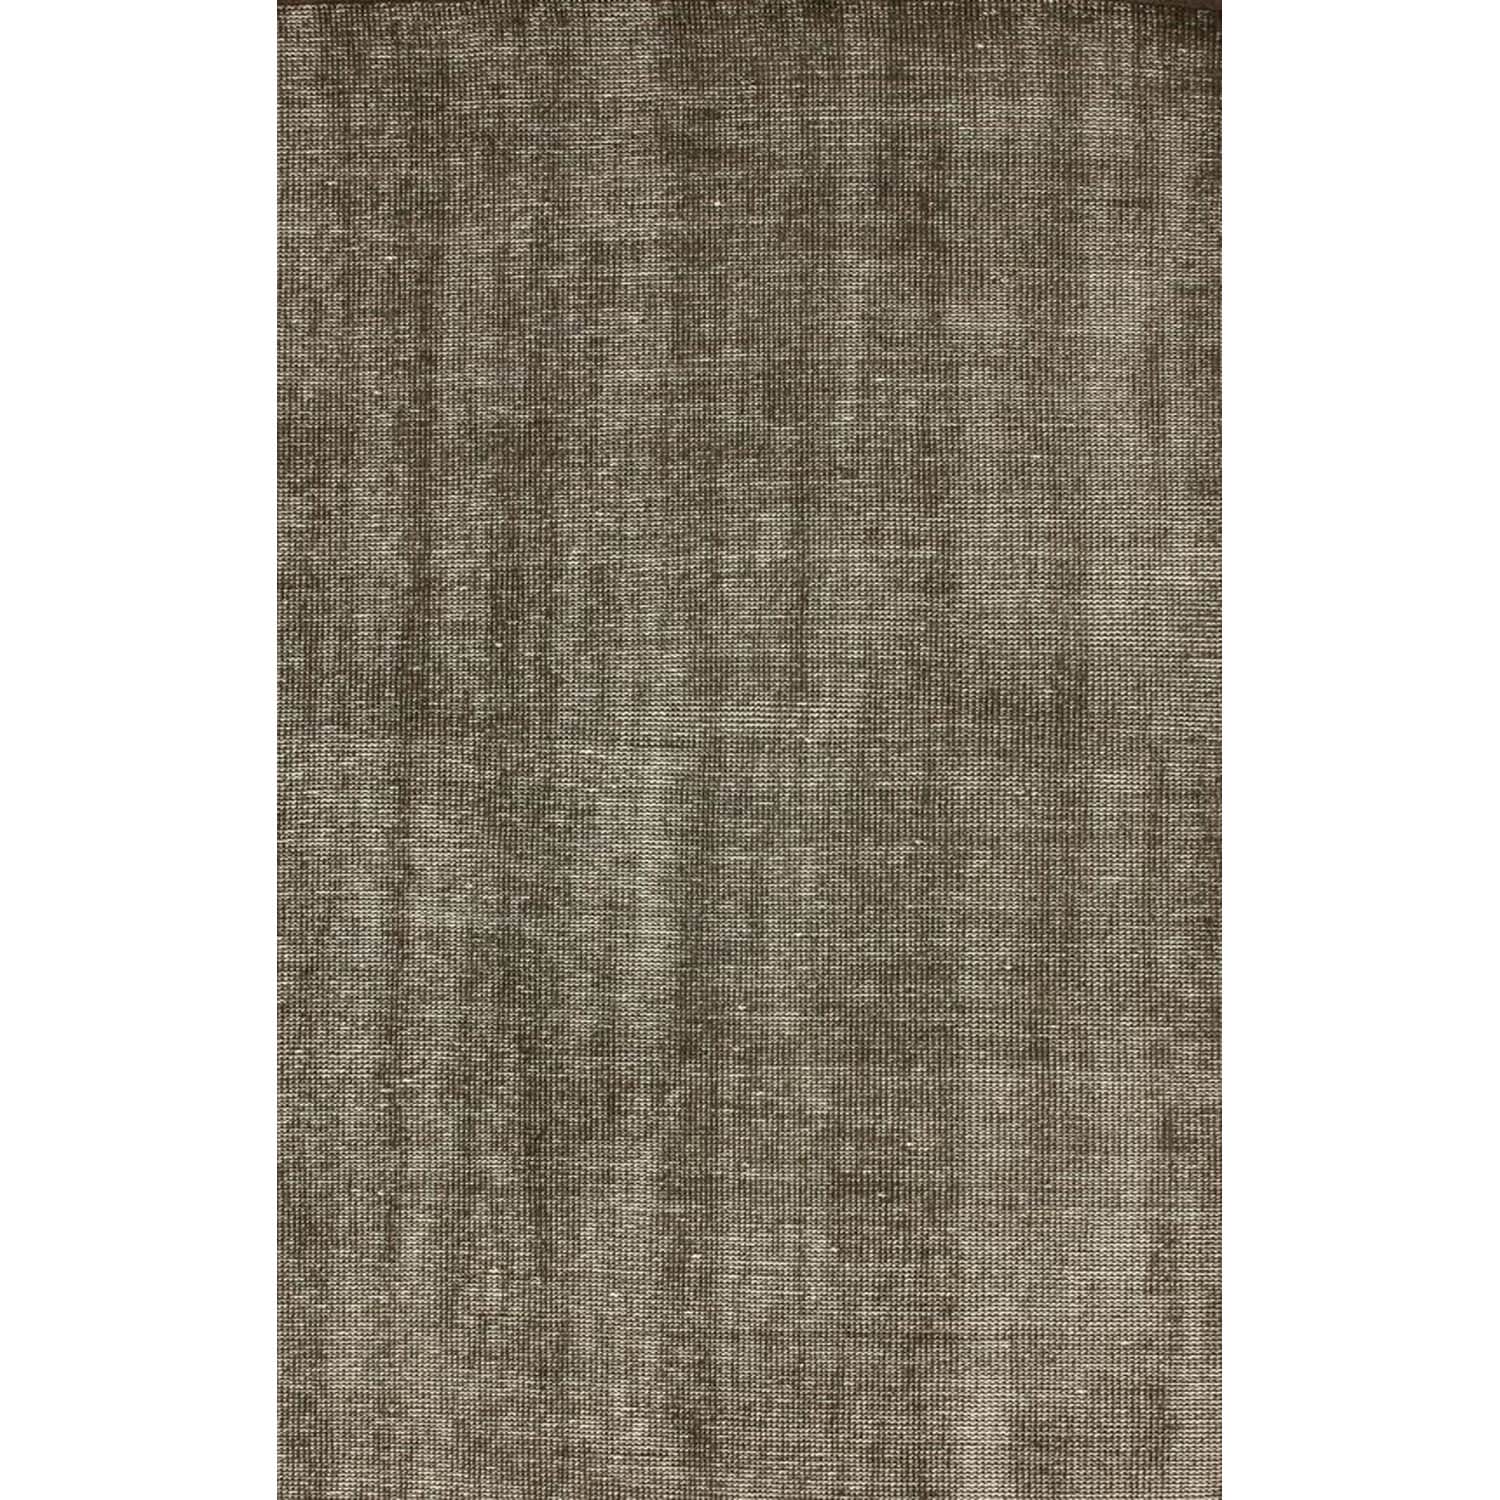 Nuloom Hand knotted Wool Overdyed Solid Cocoa Rug (4 X 6)